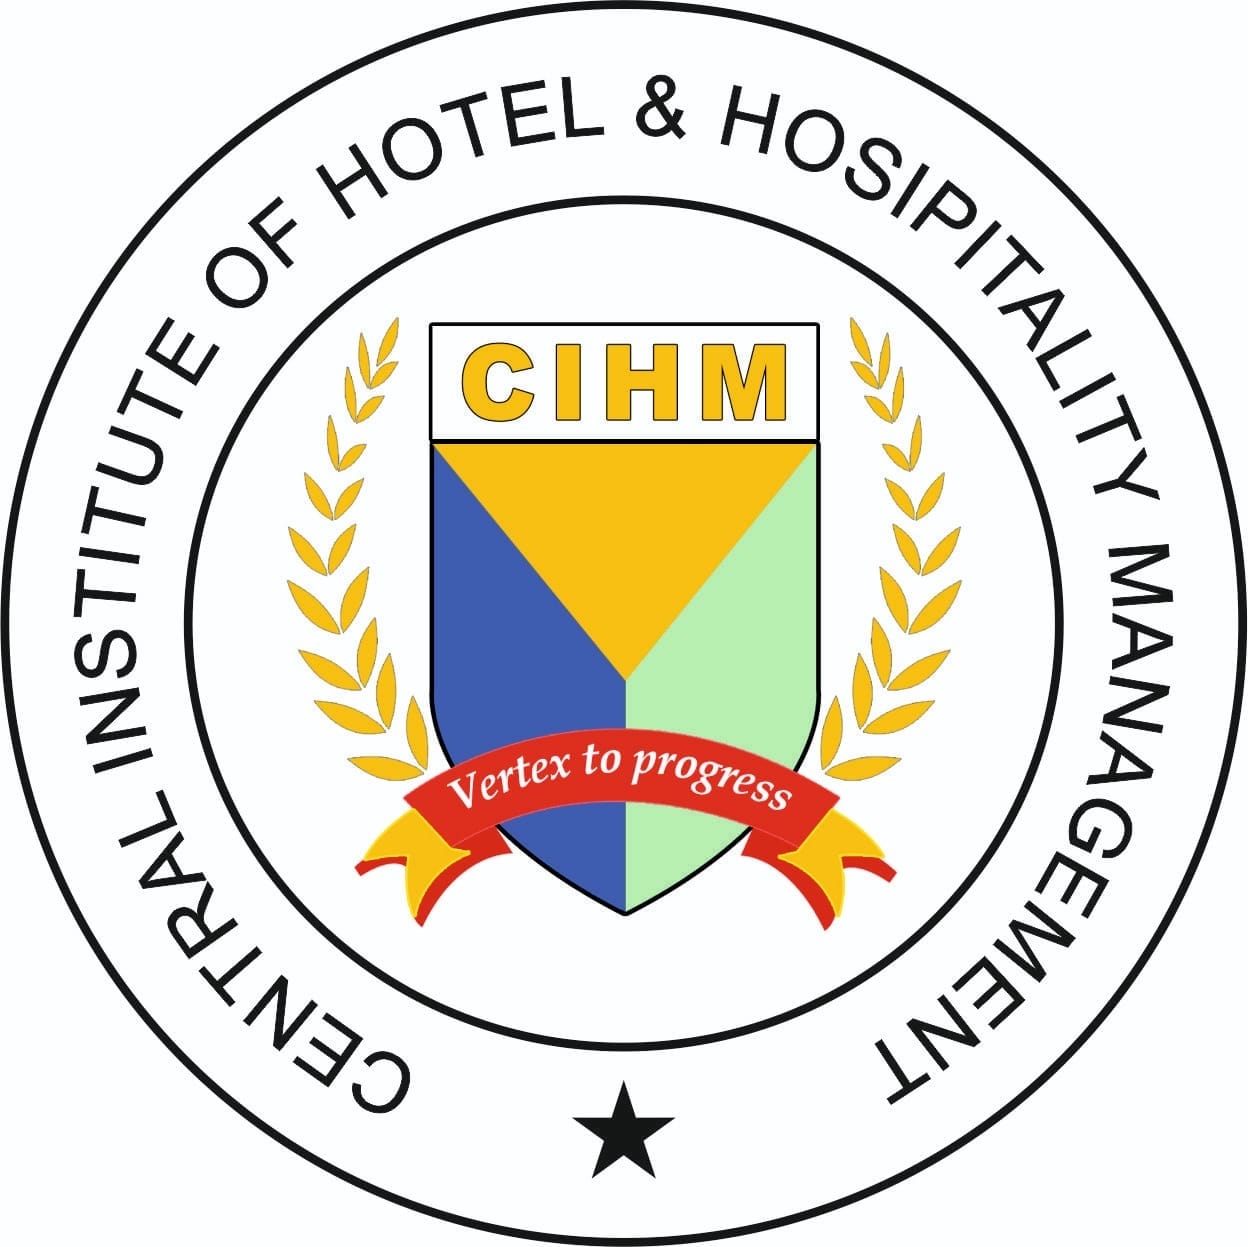 Central Institute of Hotel & Hospitality Management Logo